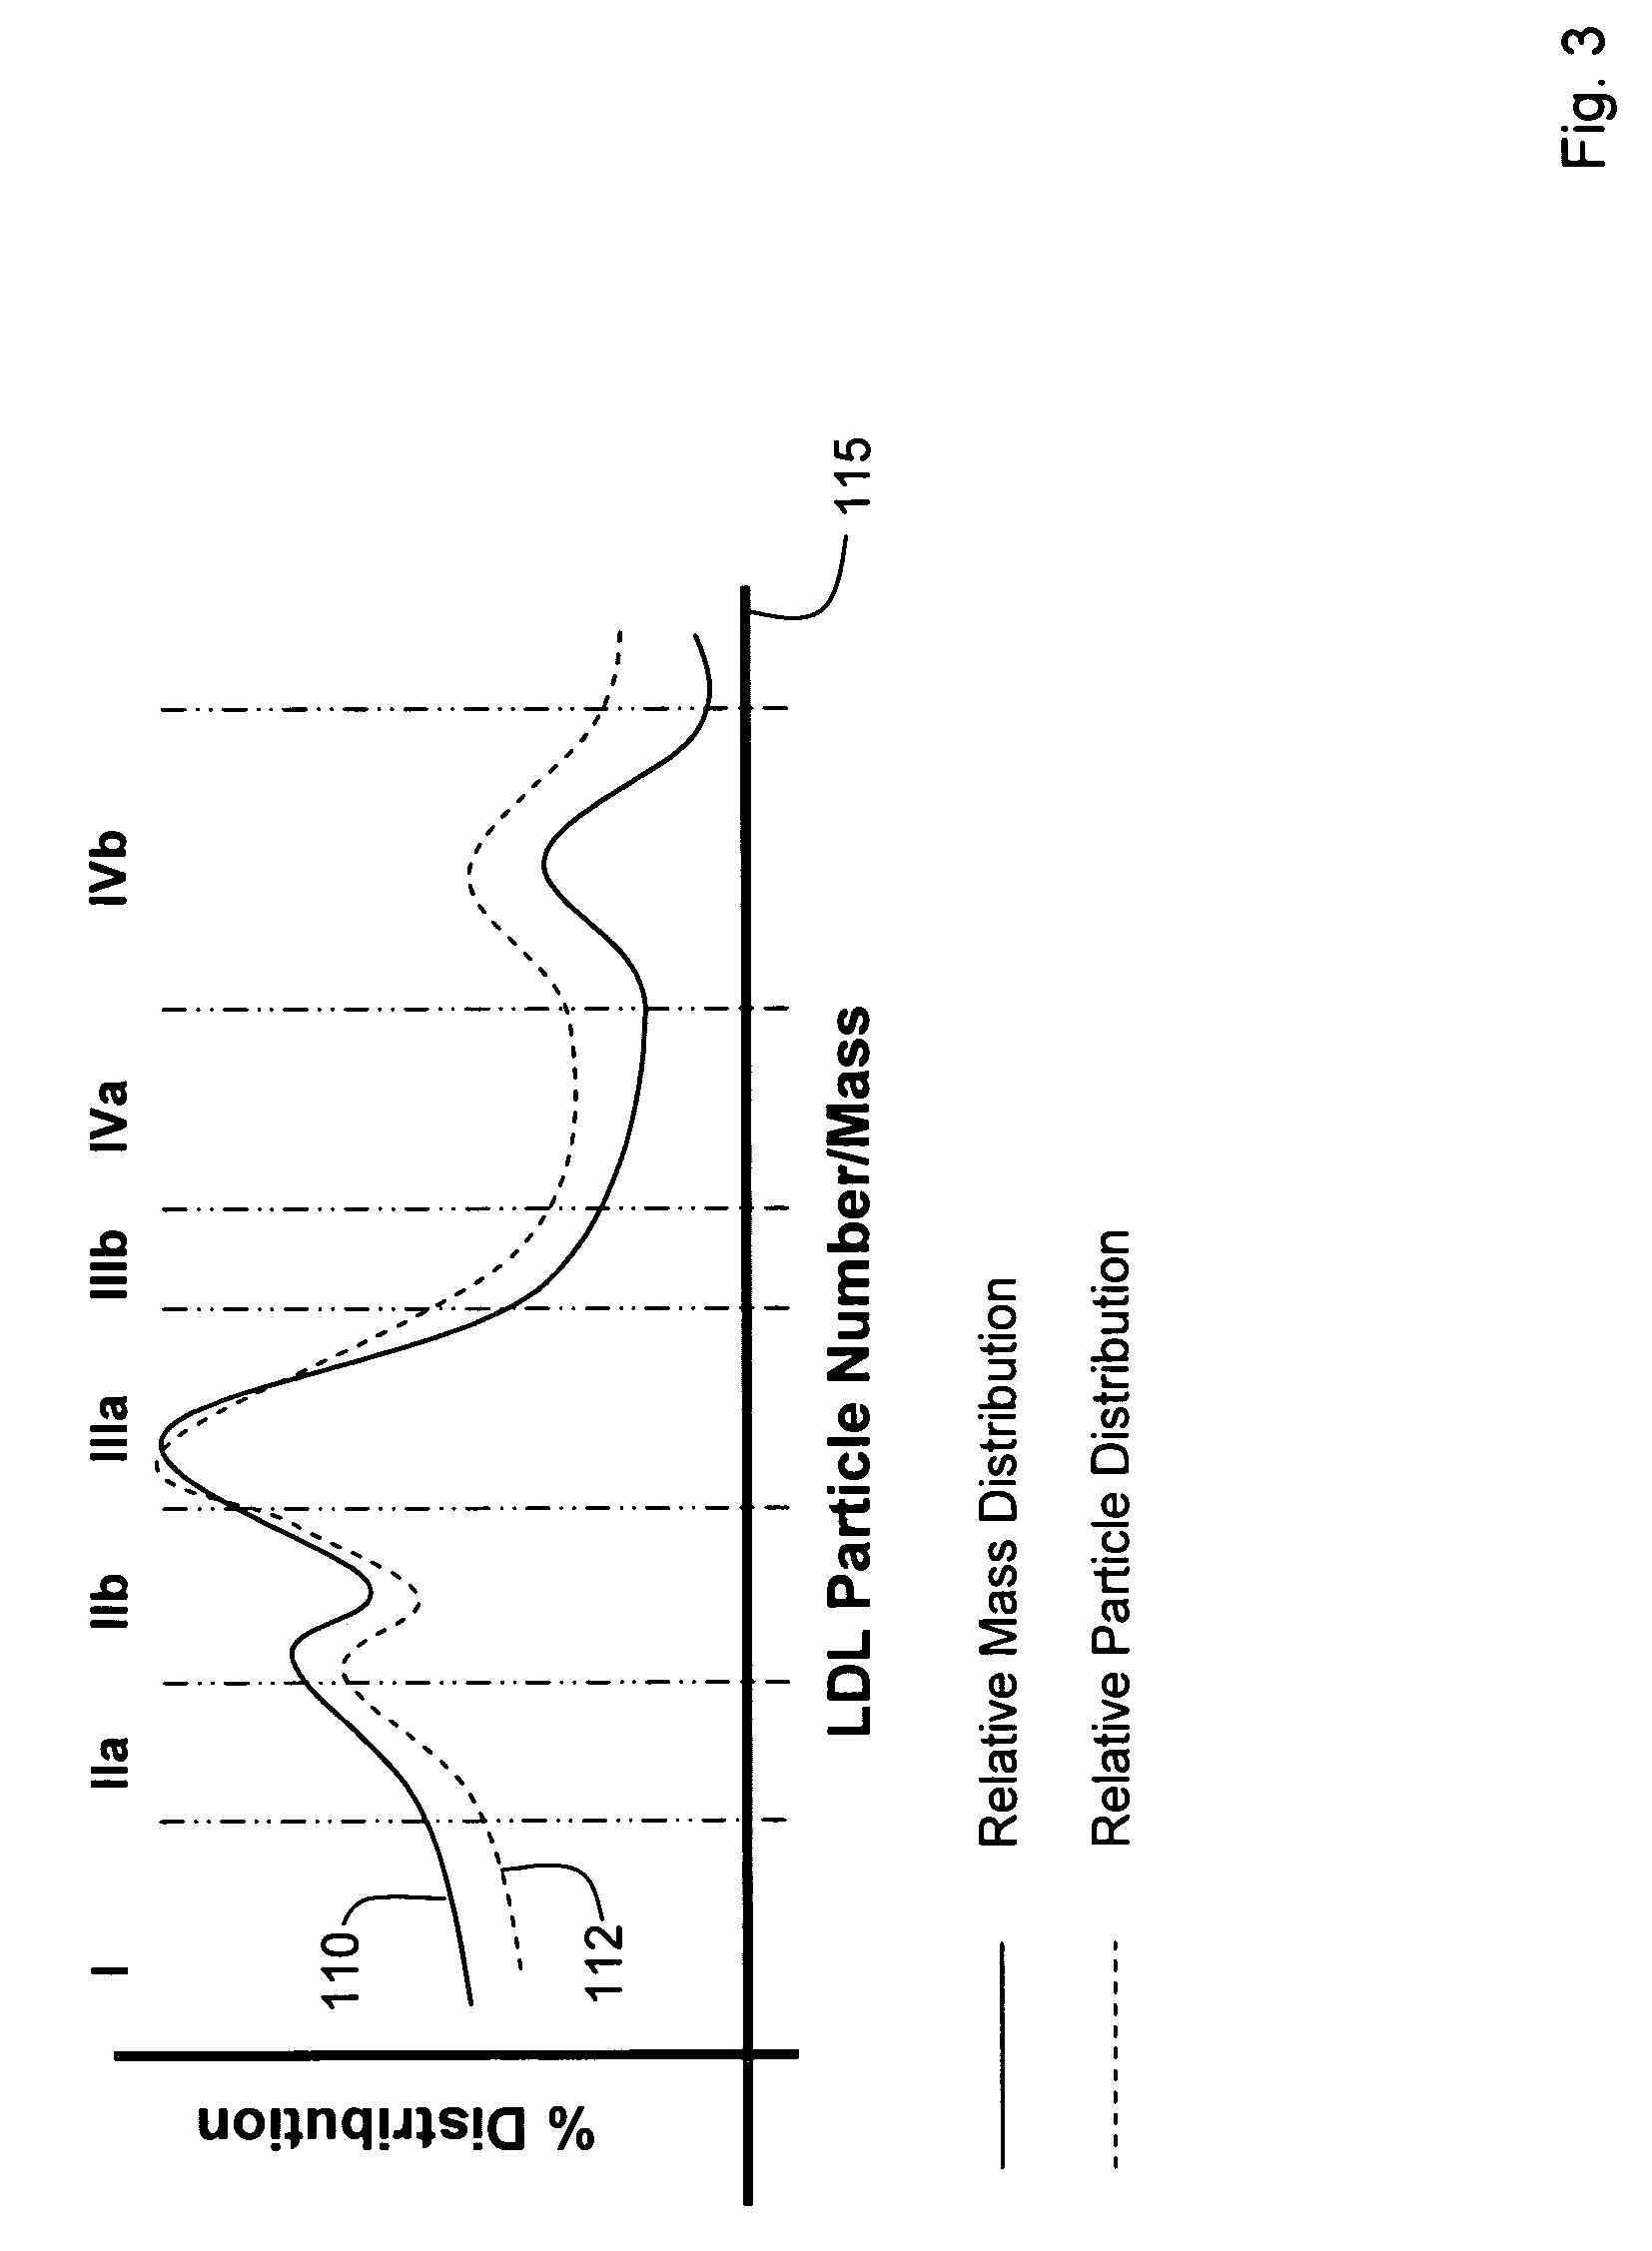 Method for quantitatively determining the LDL particle number in a distribution of LDL cholesterol subfractions